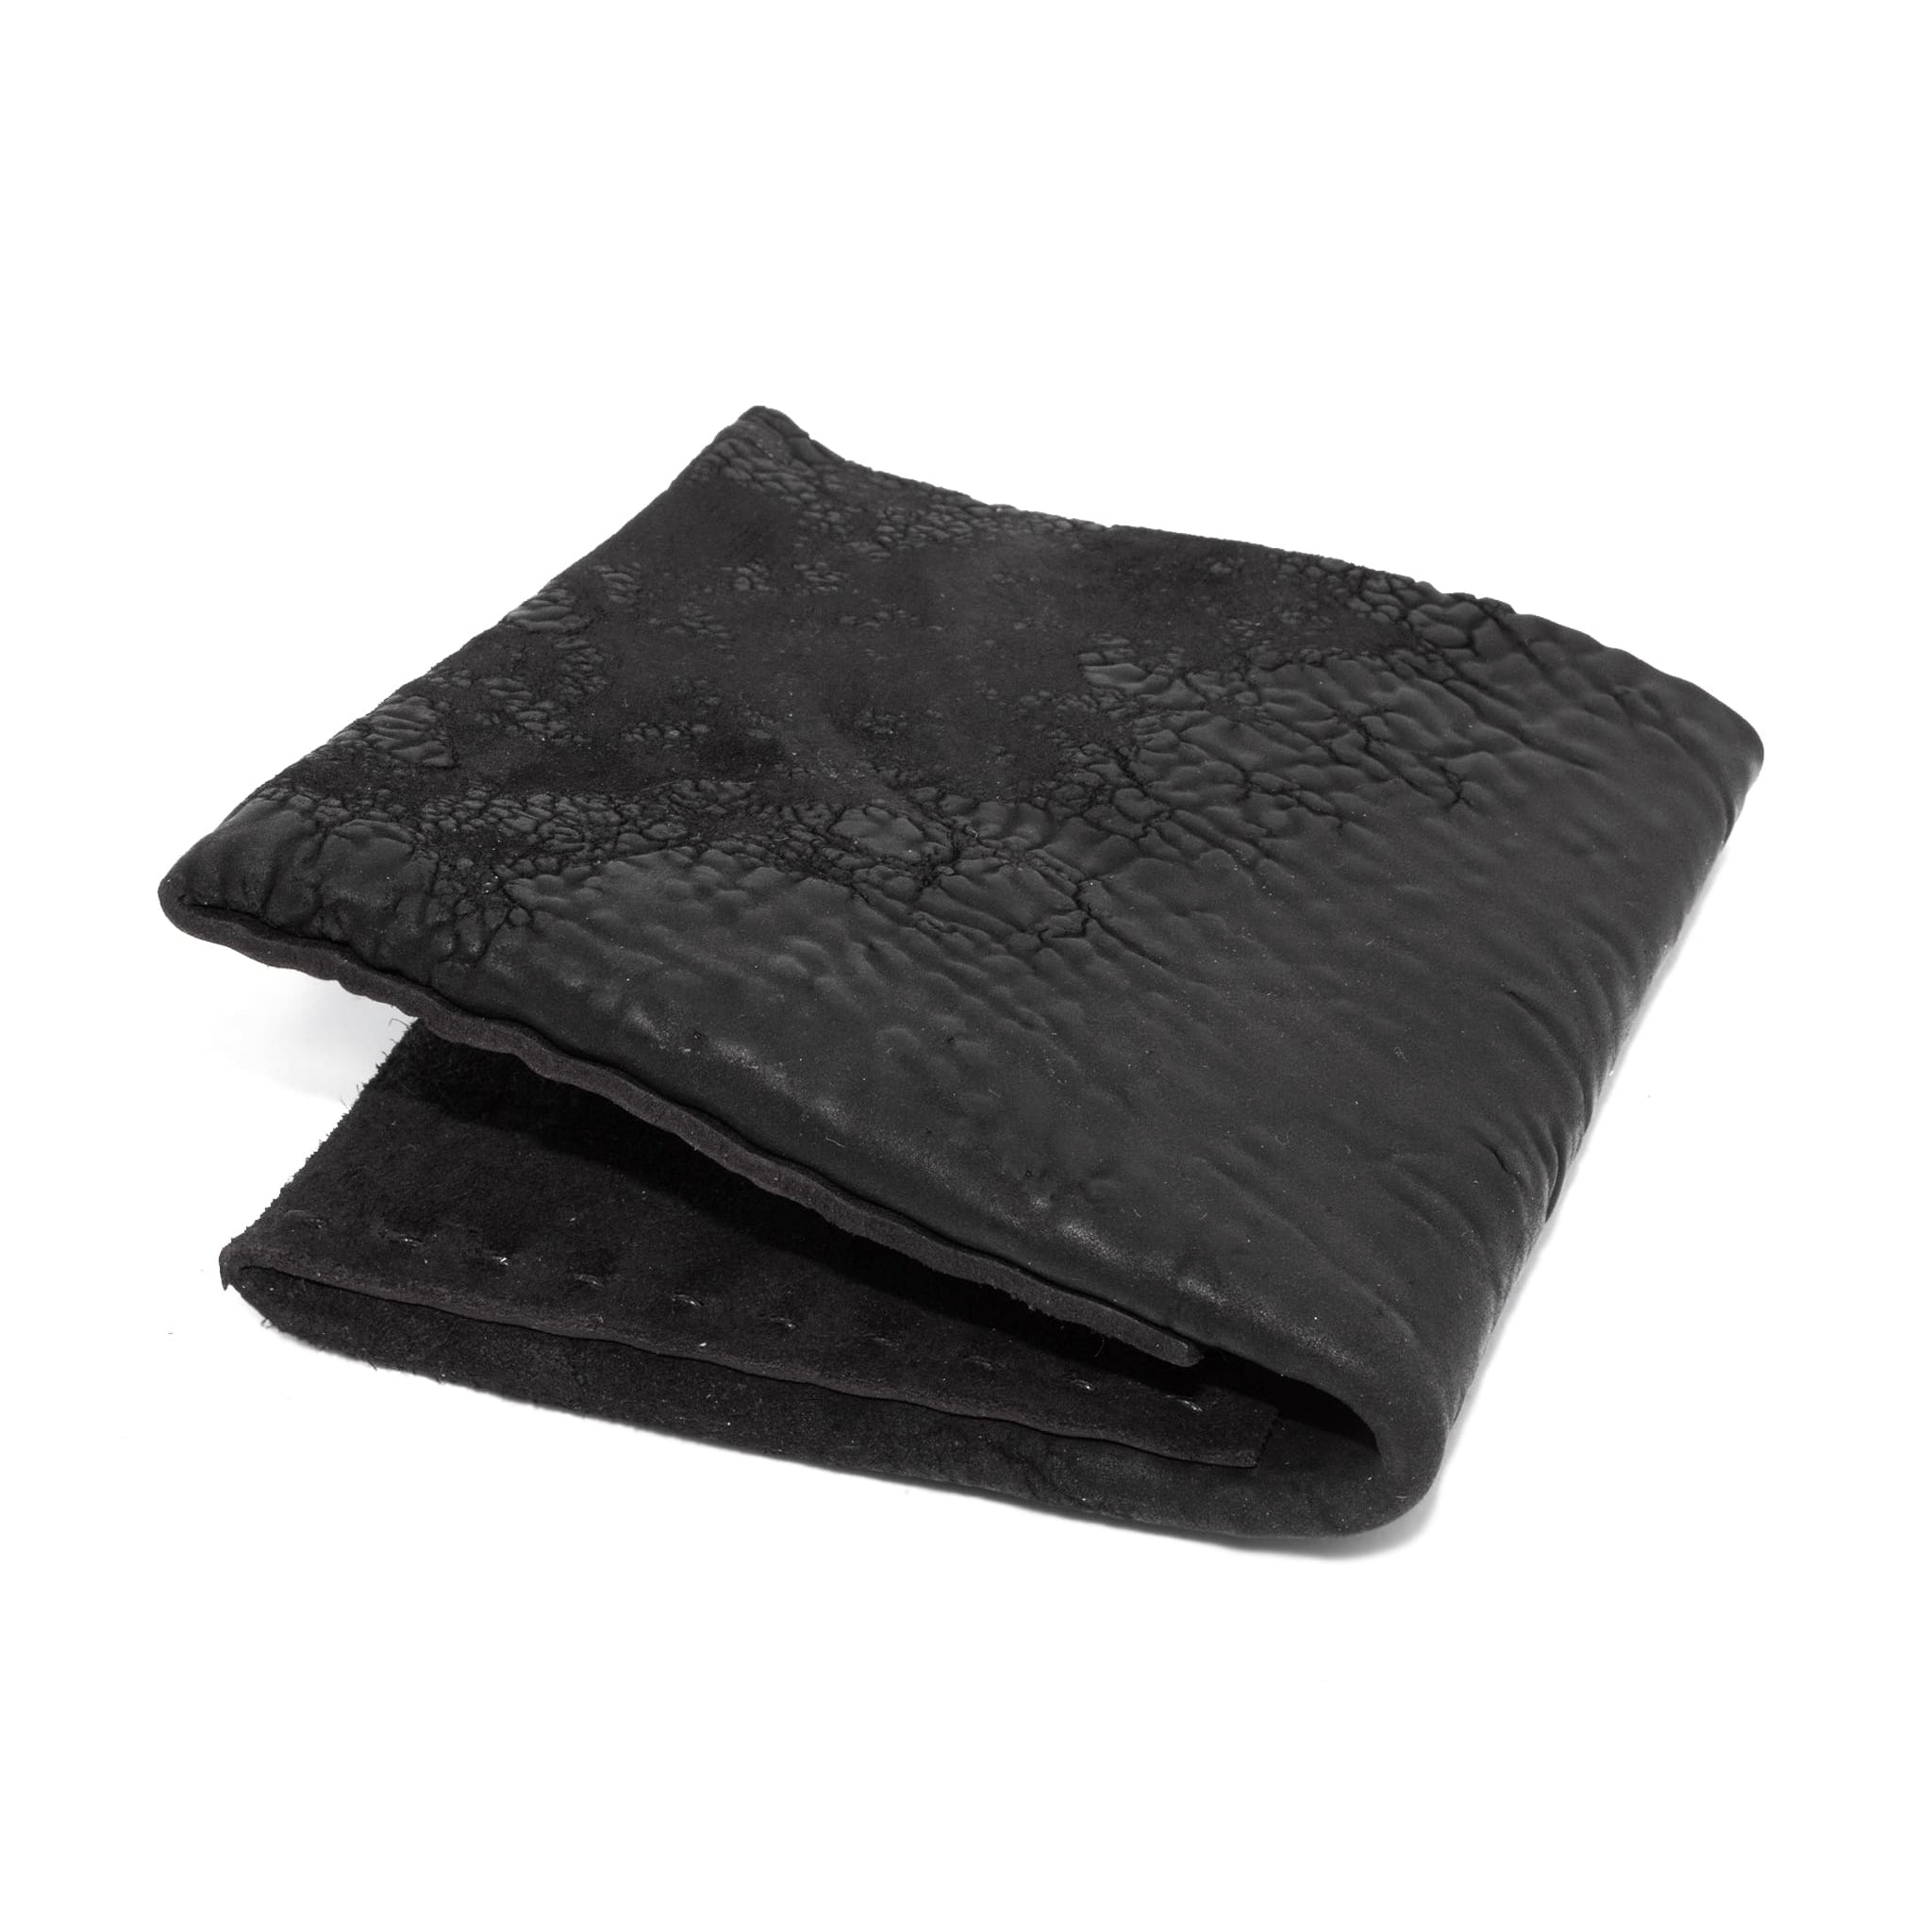 avant garde hand sewn horse leather wallet from atelier skn